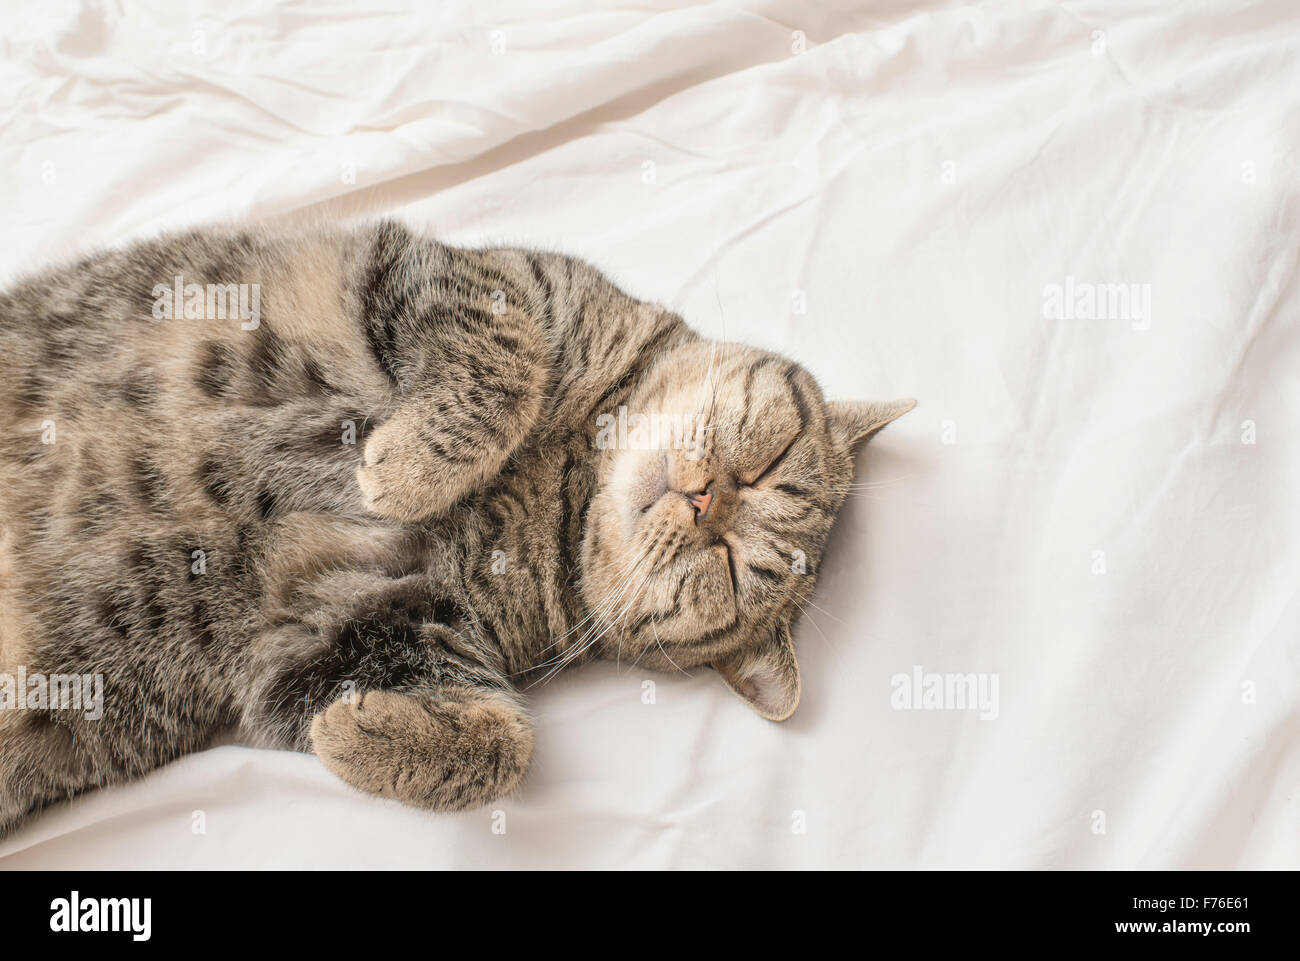 British shorthair cat lying down on its back in a bed, resting with closed eyes. Stock Photo